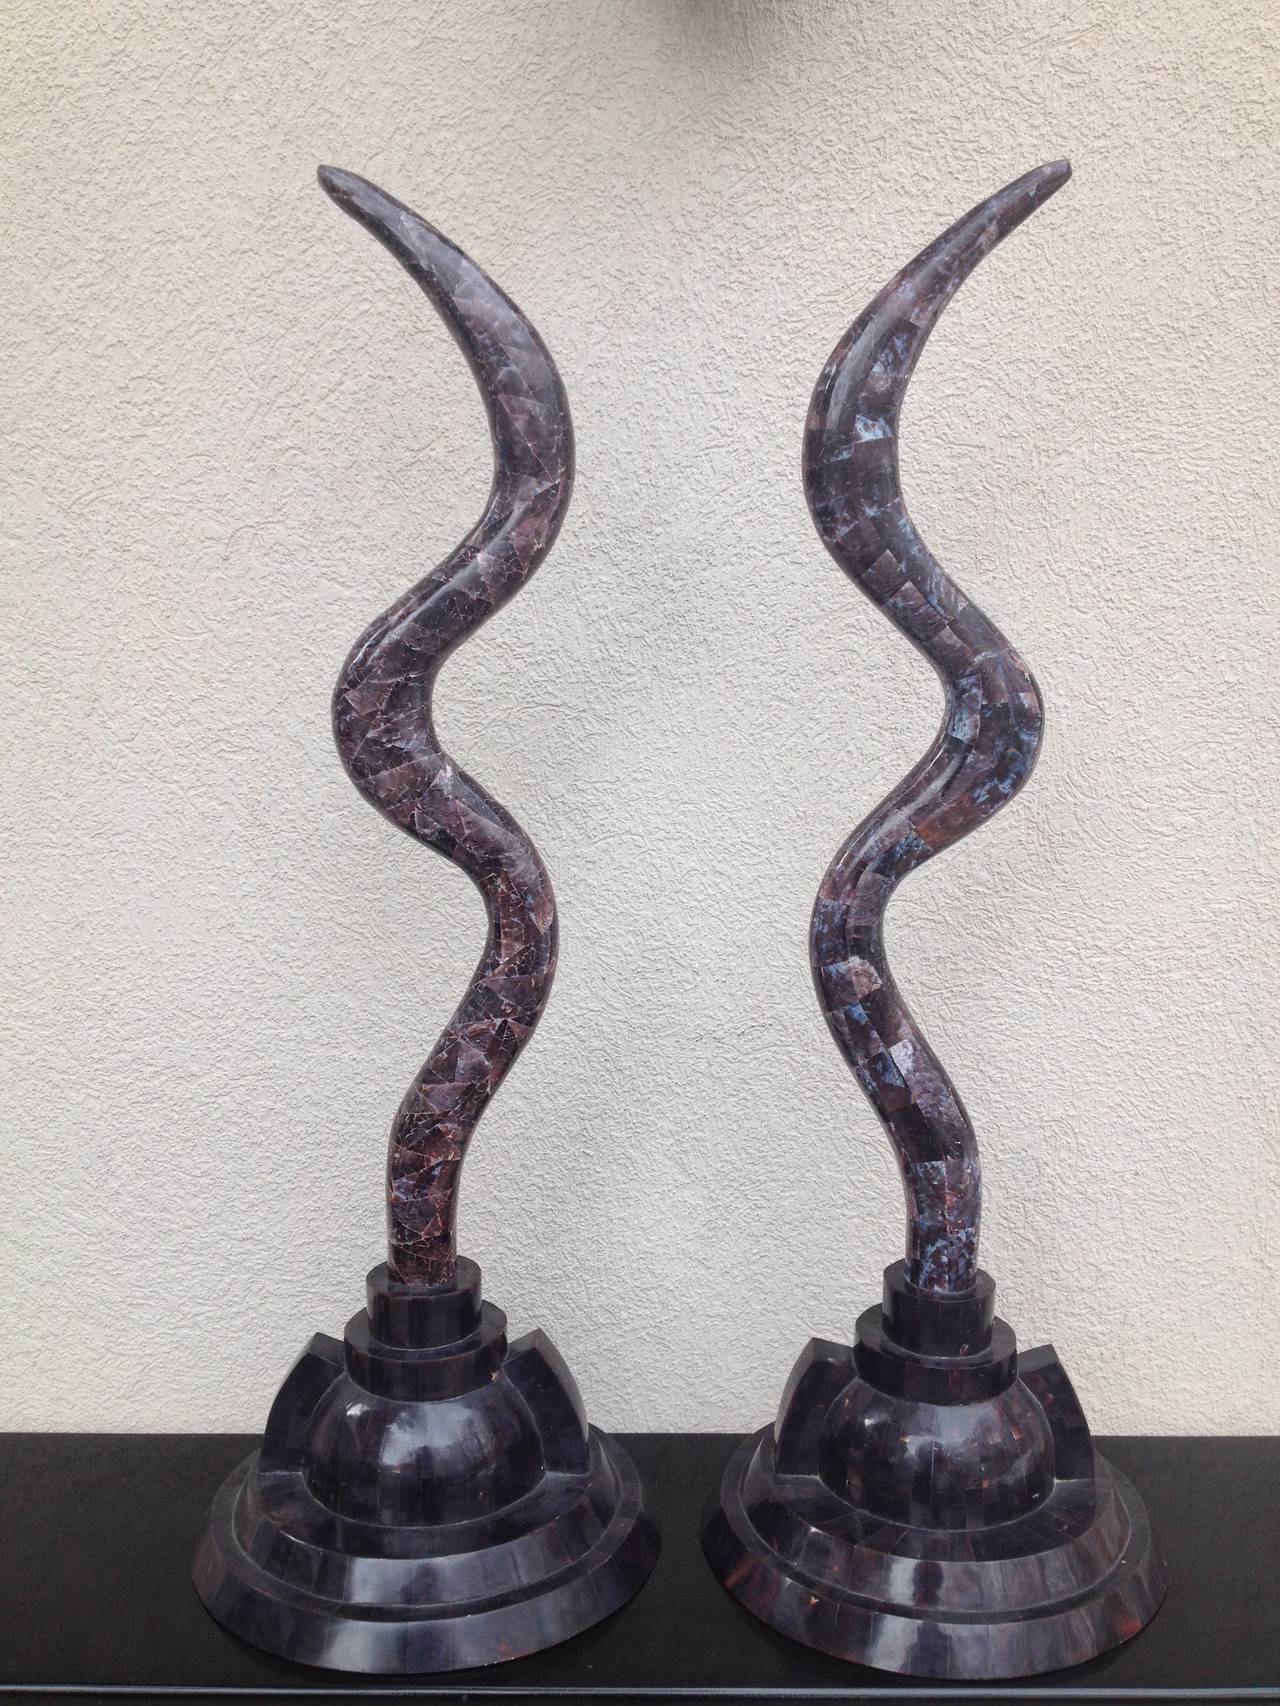 Pair of Marcius for Casa Bique Fossil stone antler shaped sculpture, bases in a tortoise colored deco design step base. And the stone work on tops is mixture dark brown purple and creme vein.